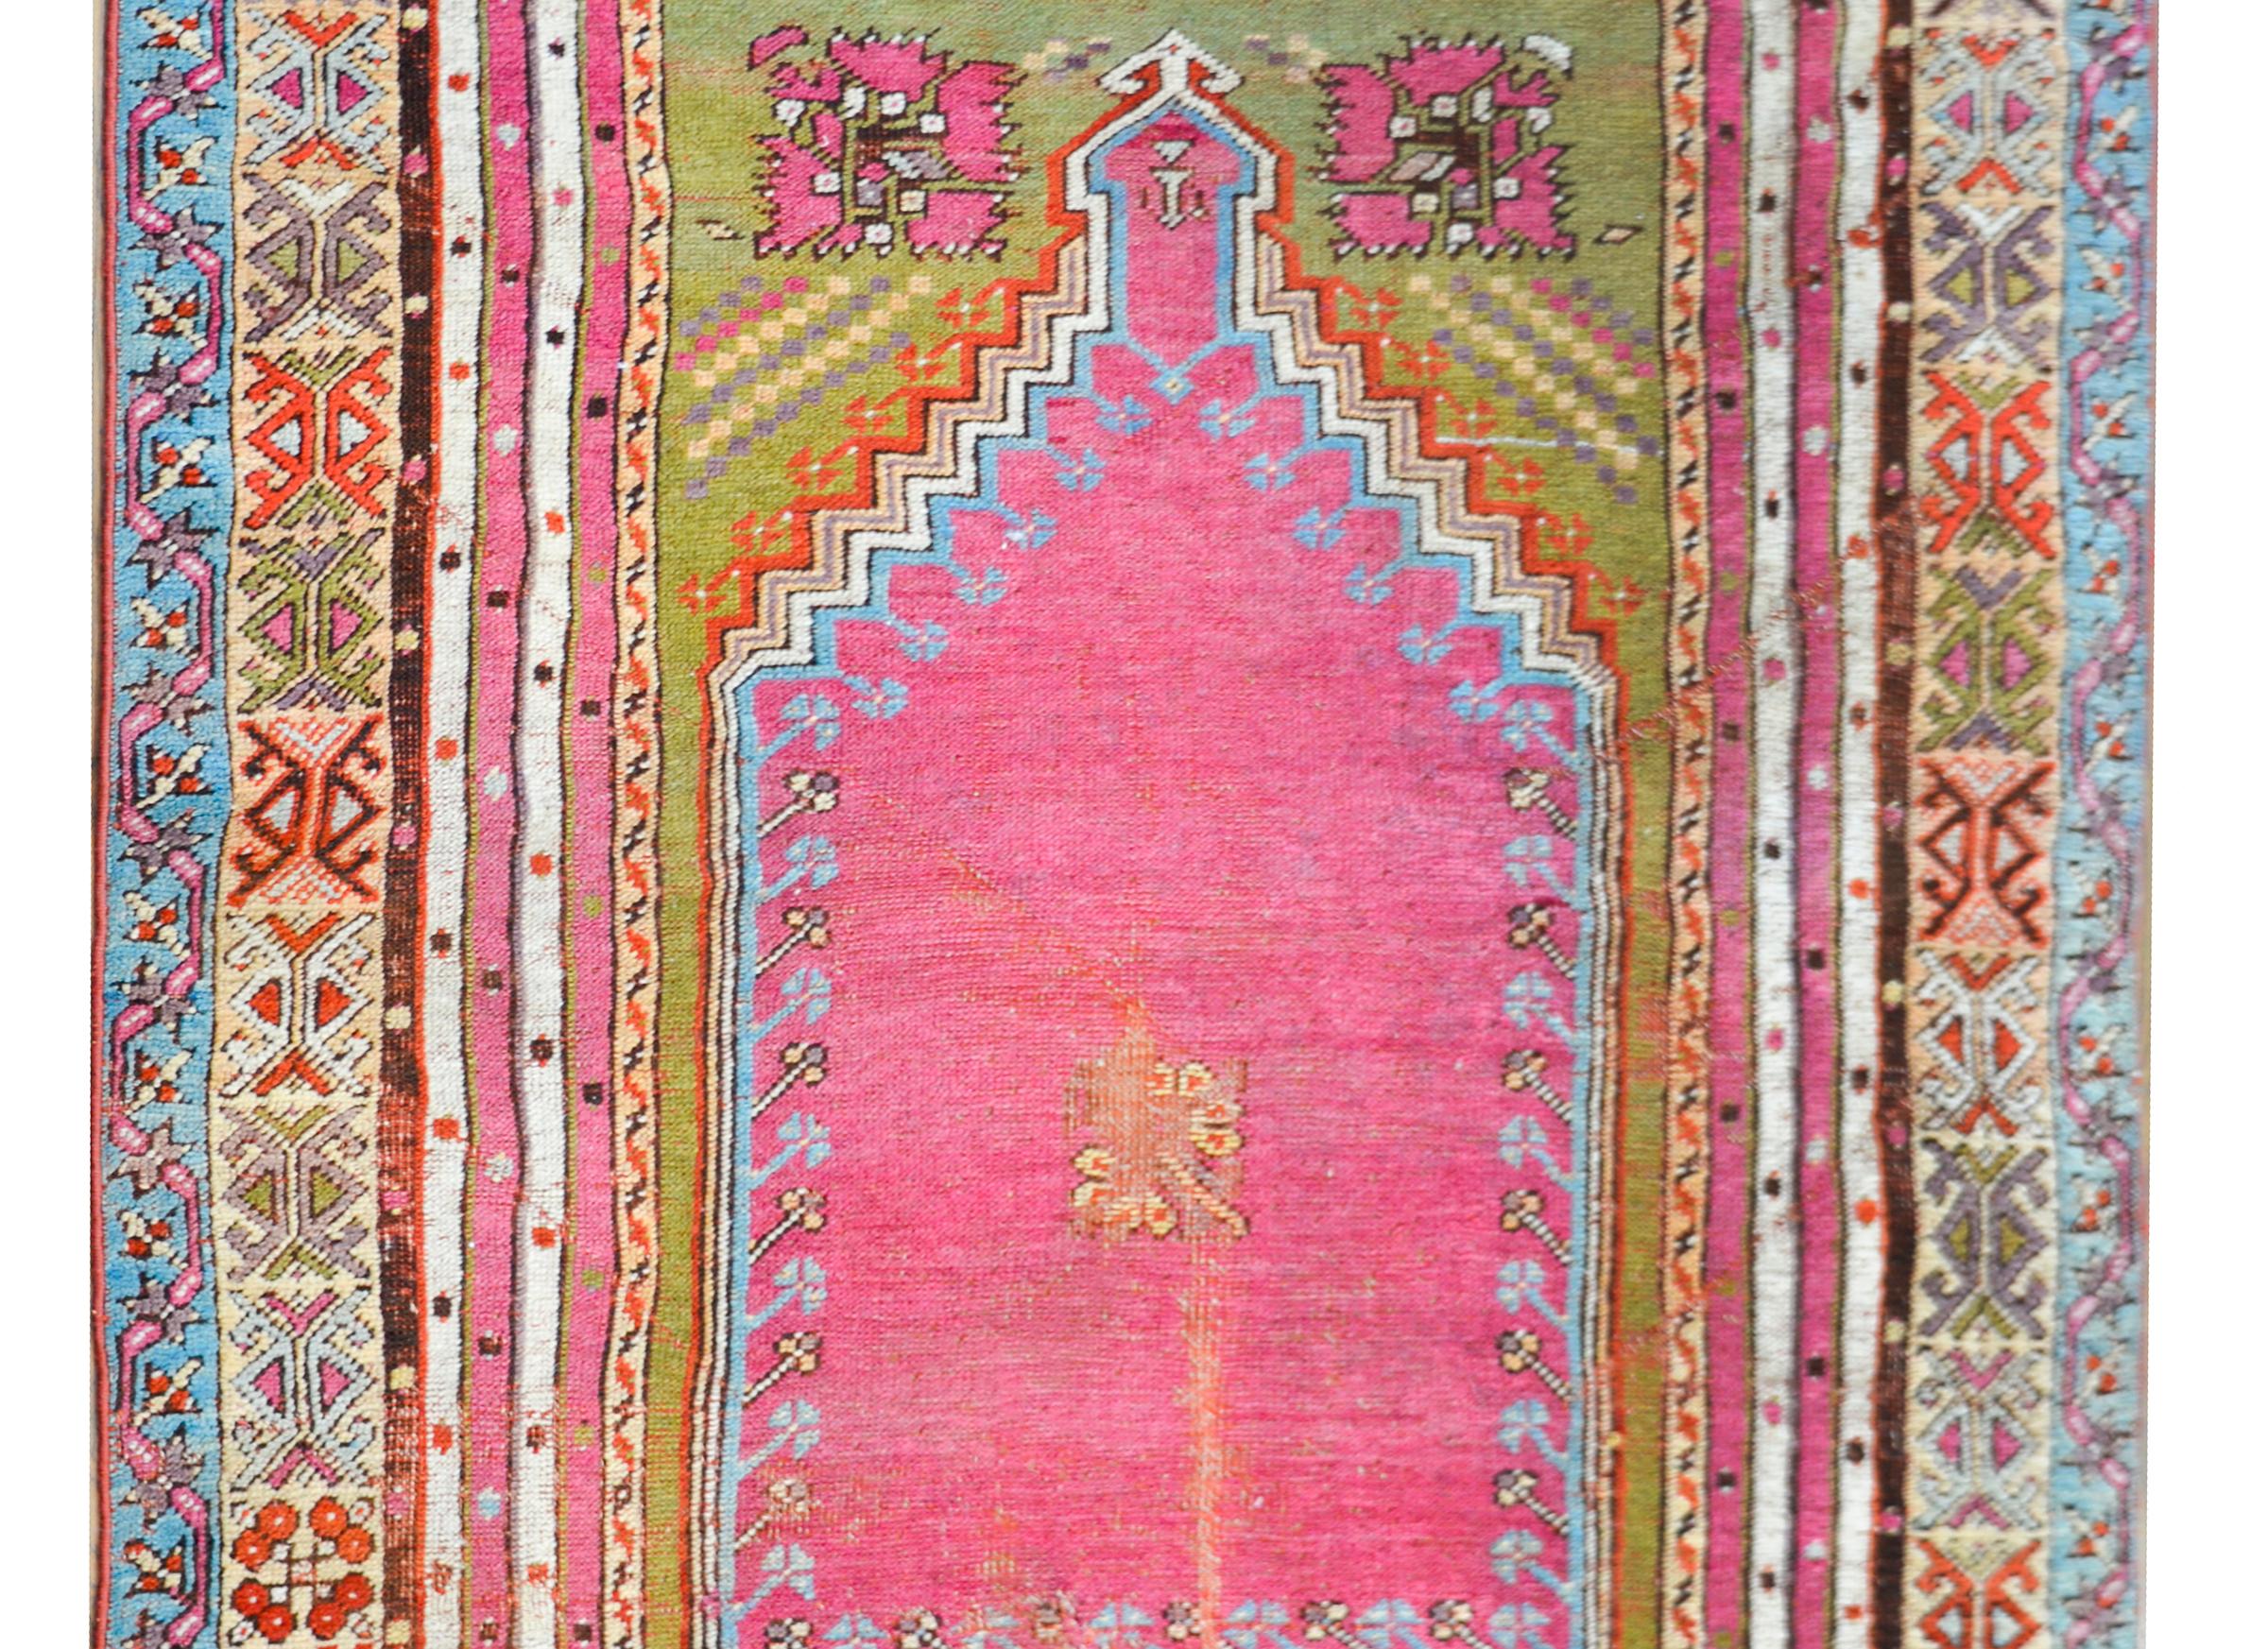 A beautiful early 20th century Turkish Konya Prayer rug with a wonderful color palette including a bright pink center surrounded by multiple thin stylized floral patterned stripes woven in teal, coral, yellow, chartreuse green, and white.